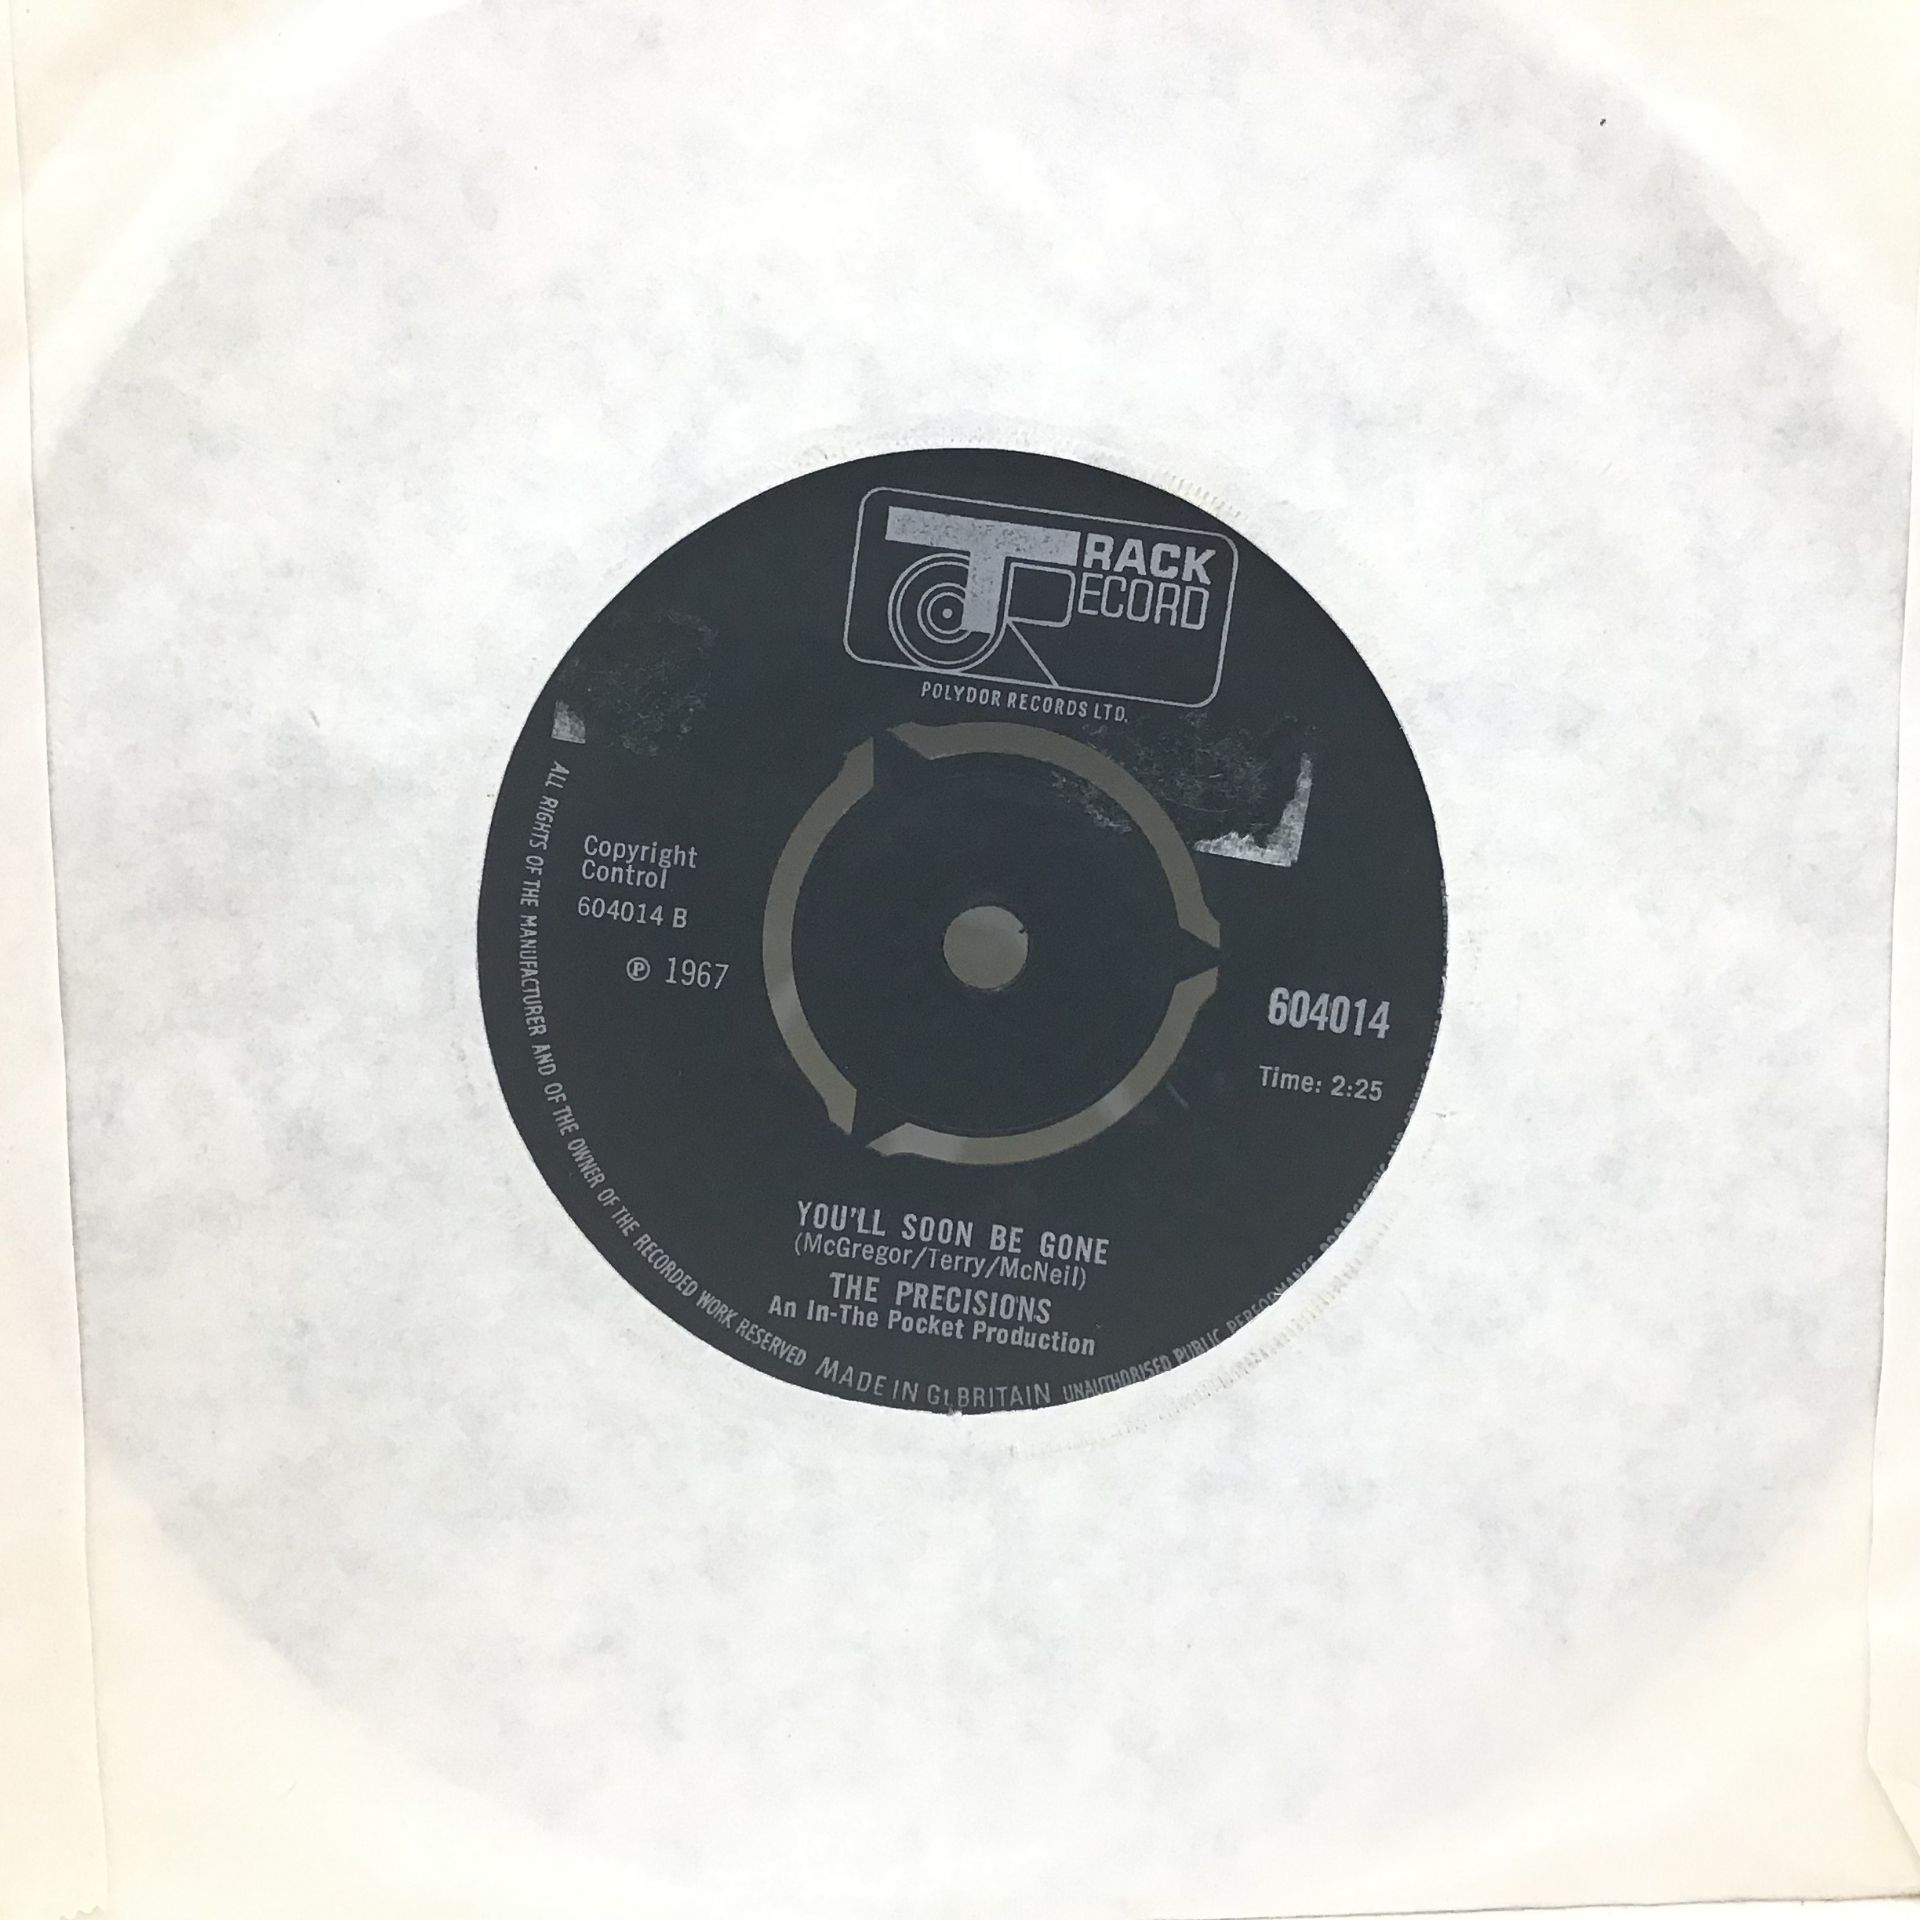 THE PRECISIONS 7” VINYL SINGLE. Super Northern Soul single here entitled If This Is Love (I’d Rather - Image 2 of 2